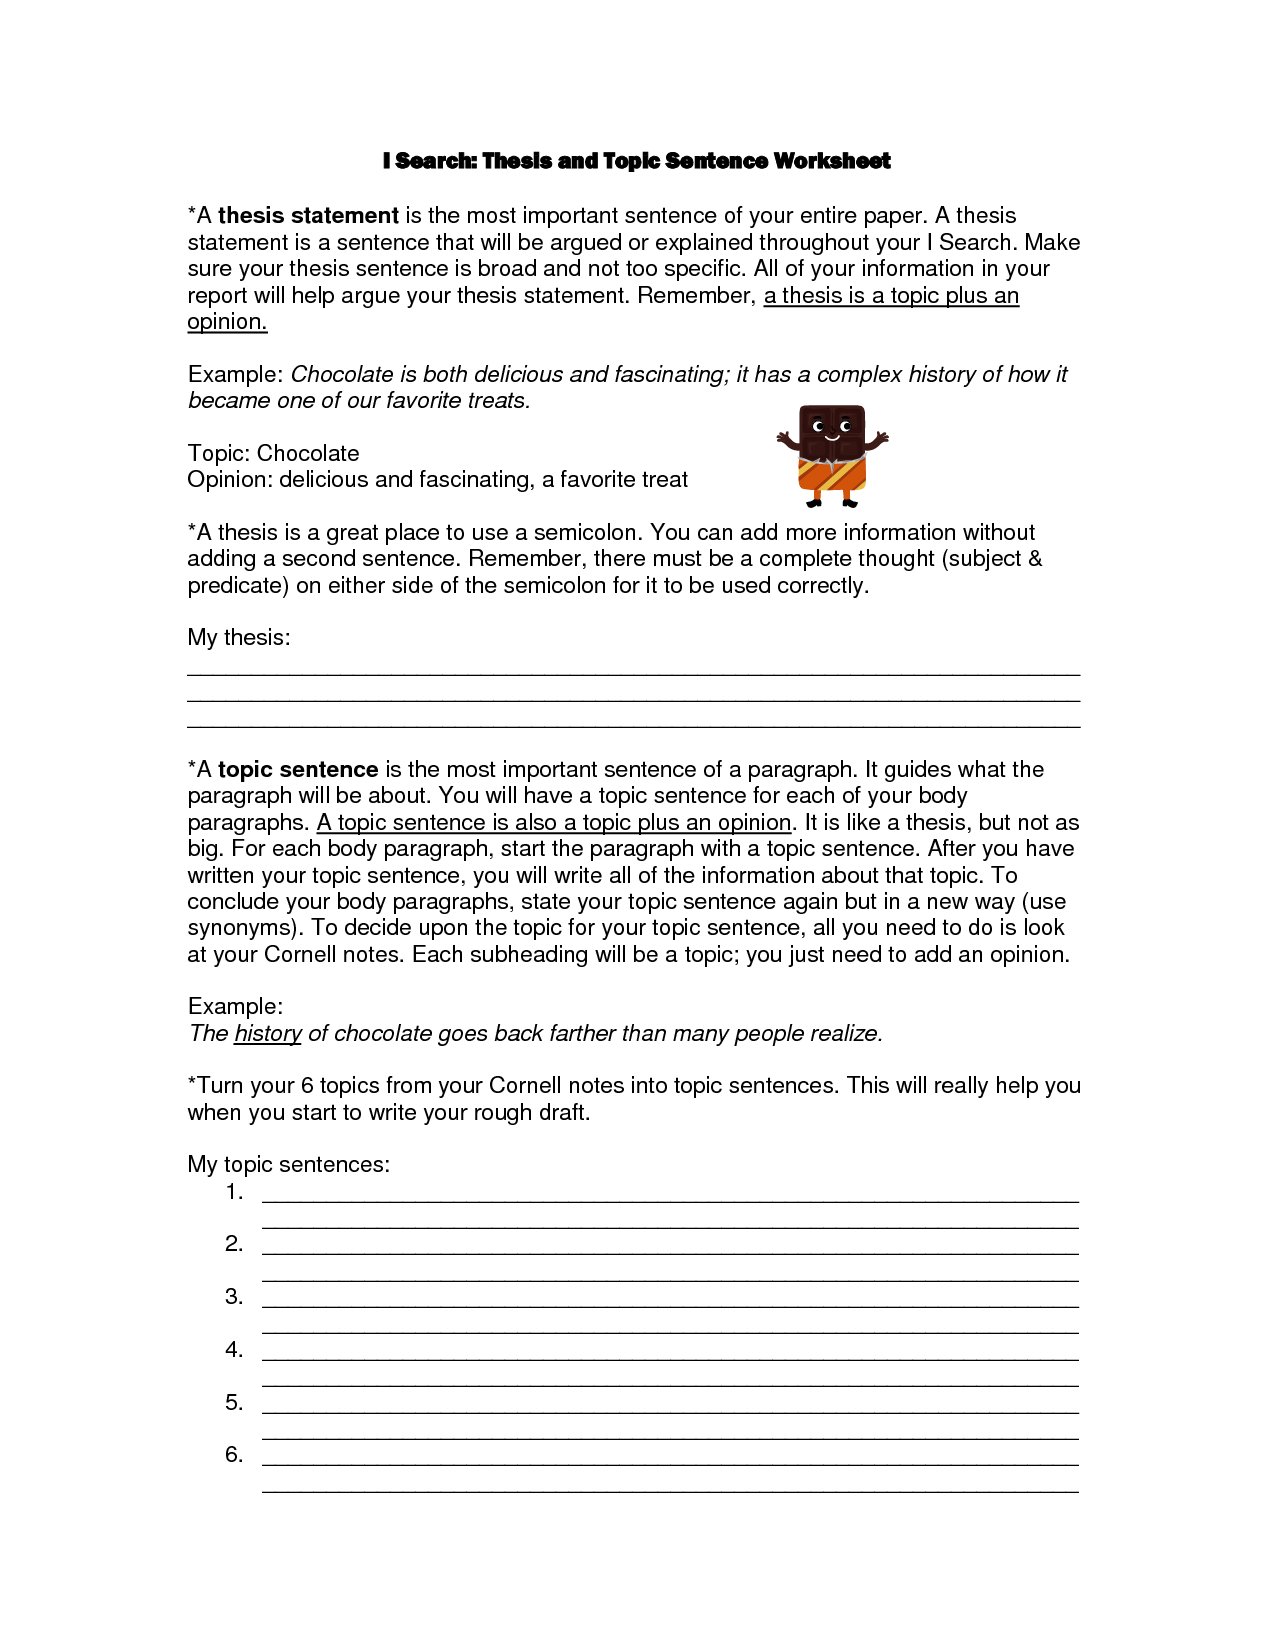 Identifying Topic Sentence Supporting Details Worksheet